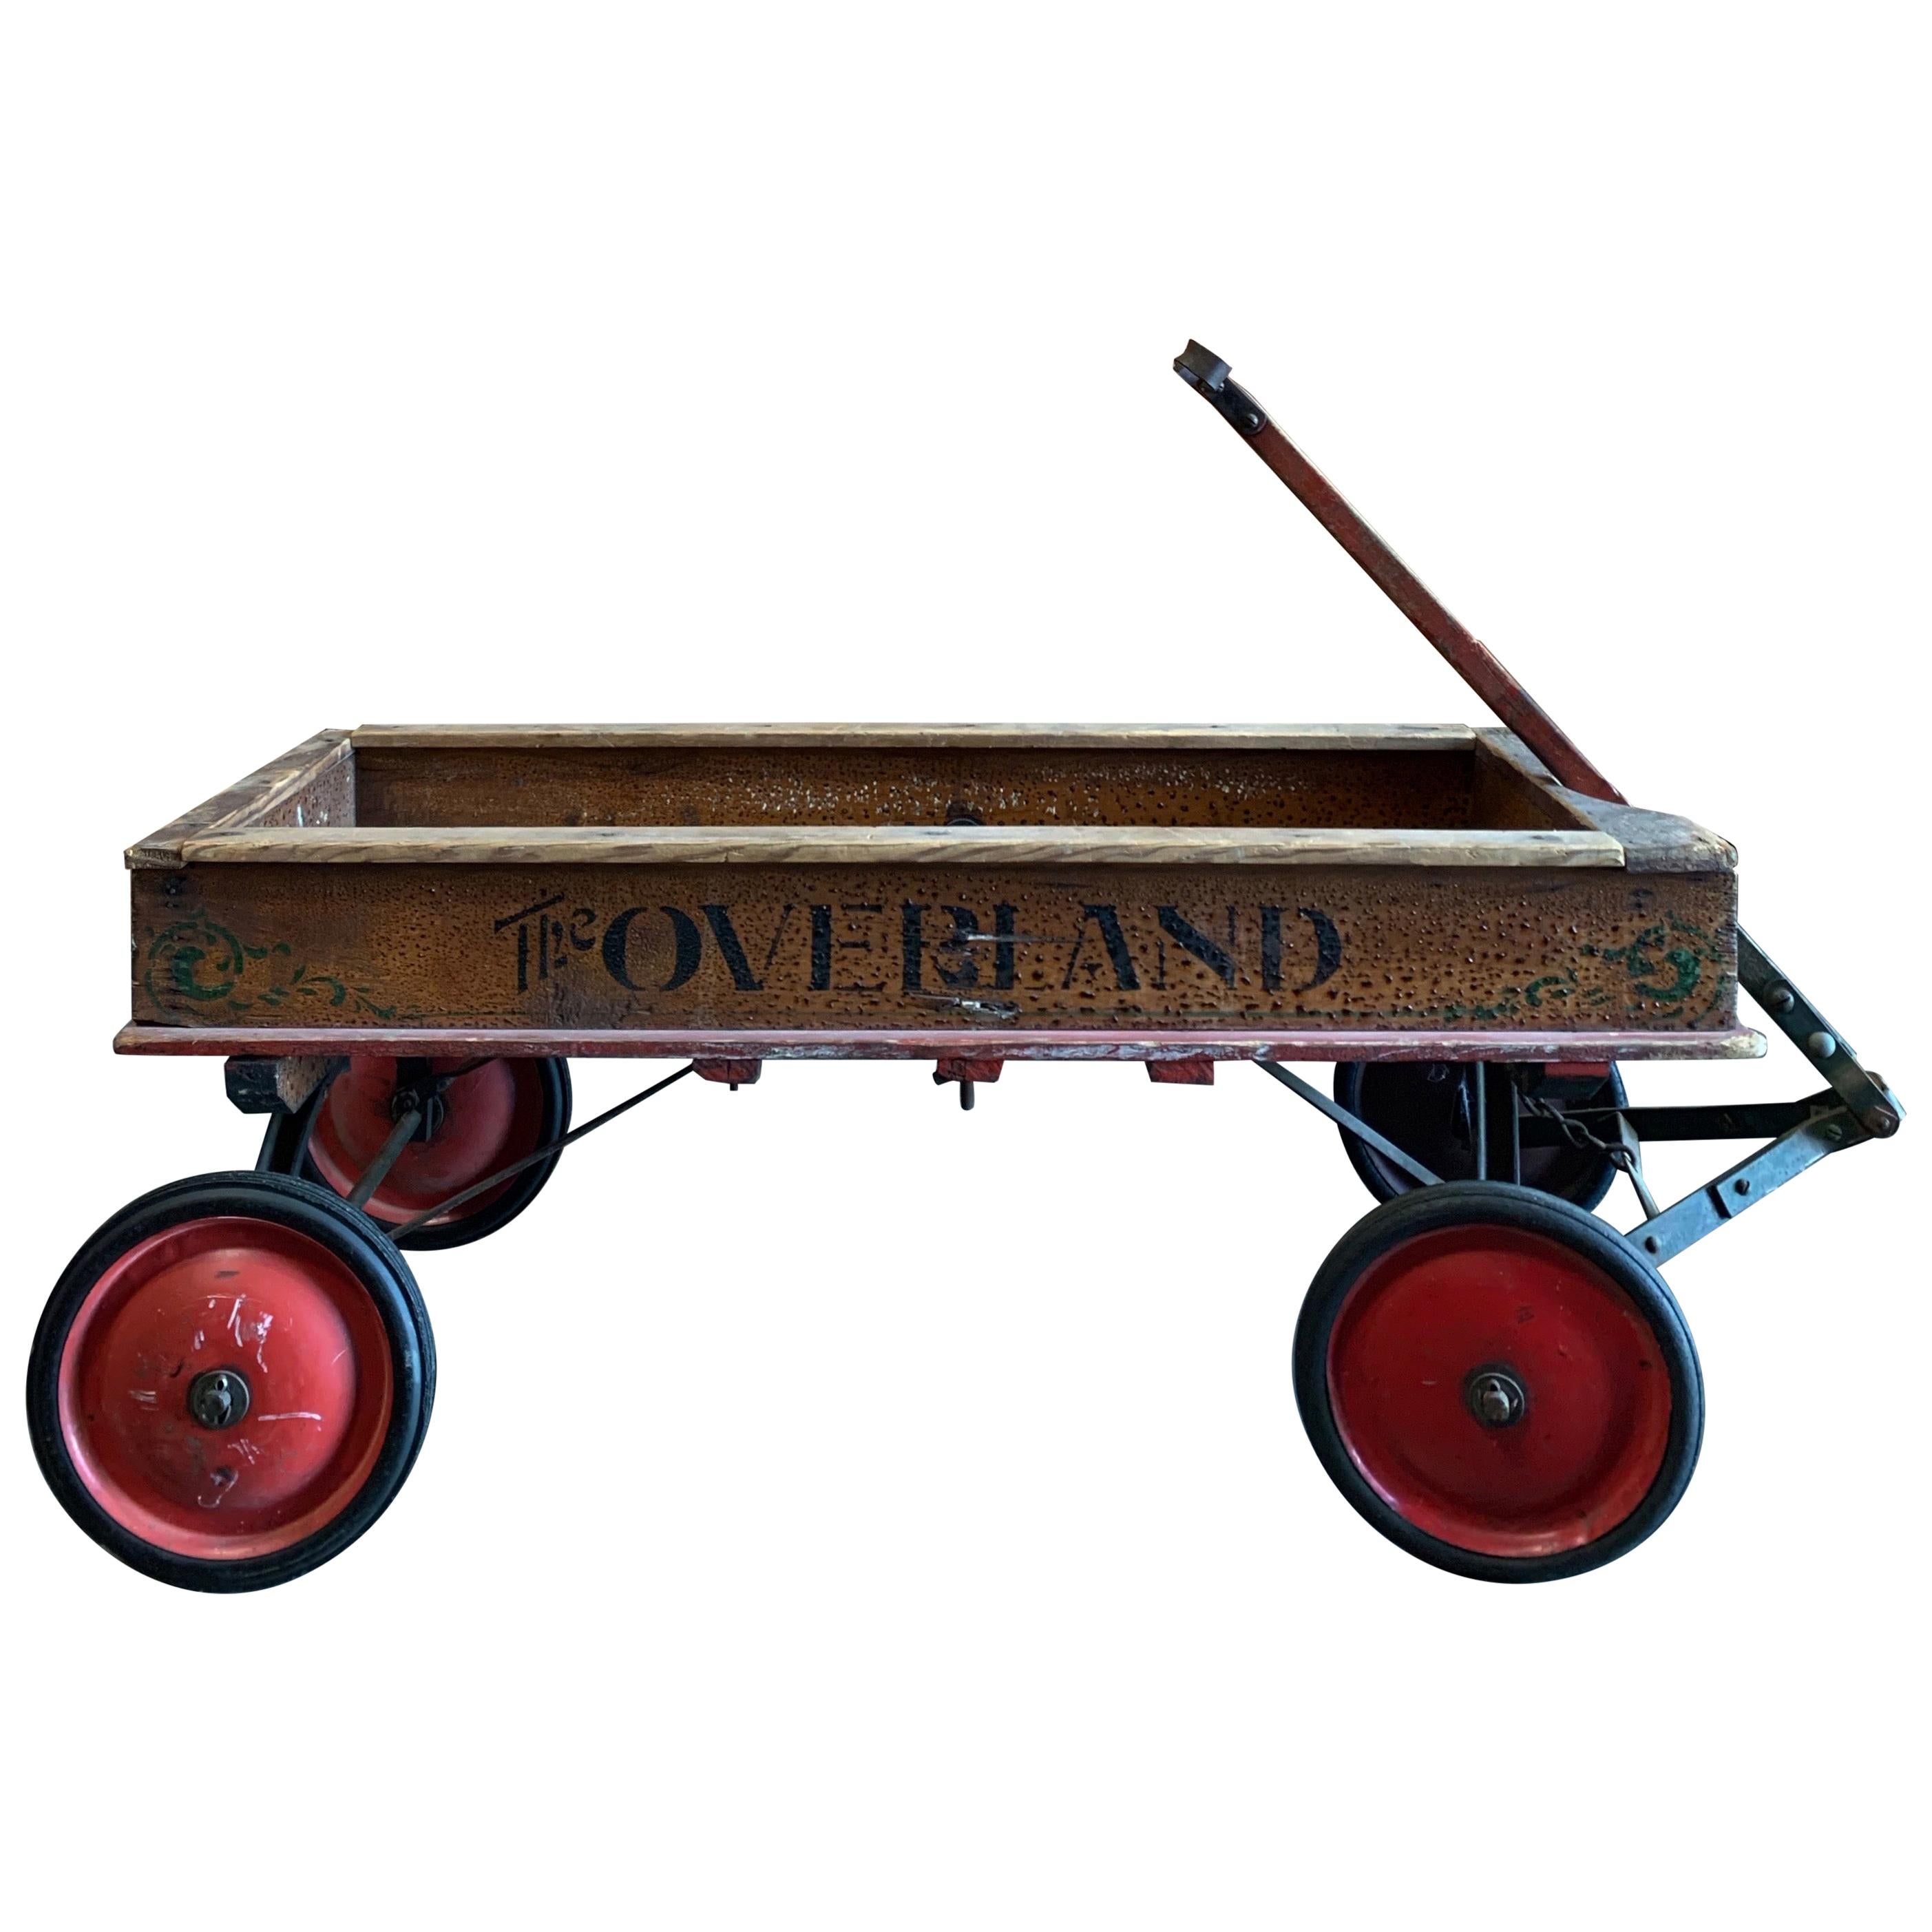 Hunt, Helm, Ferris & Company vintage "The Overland" wagon For Sale